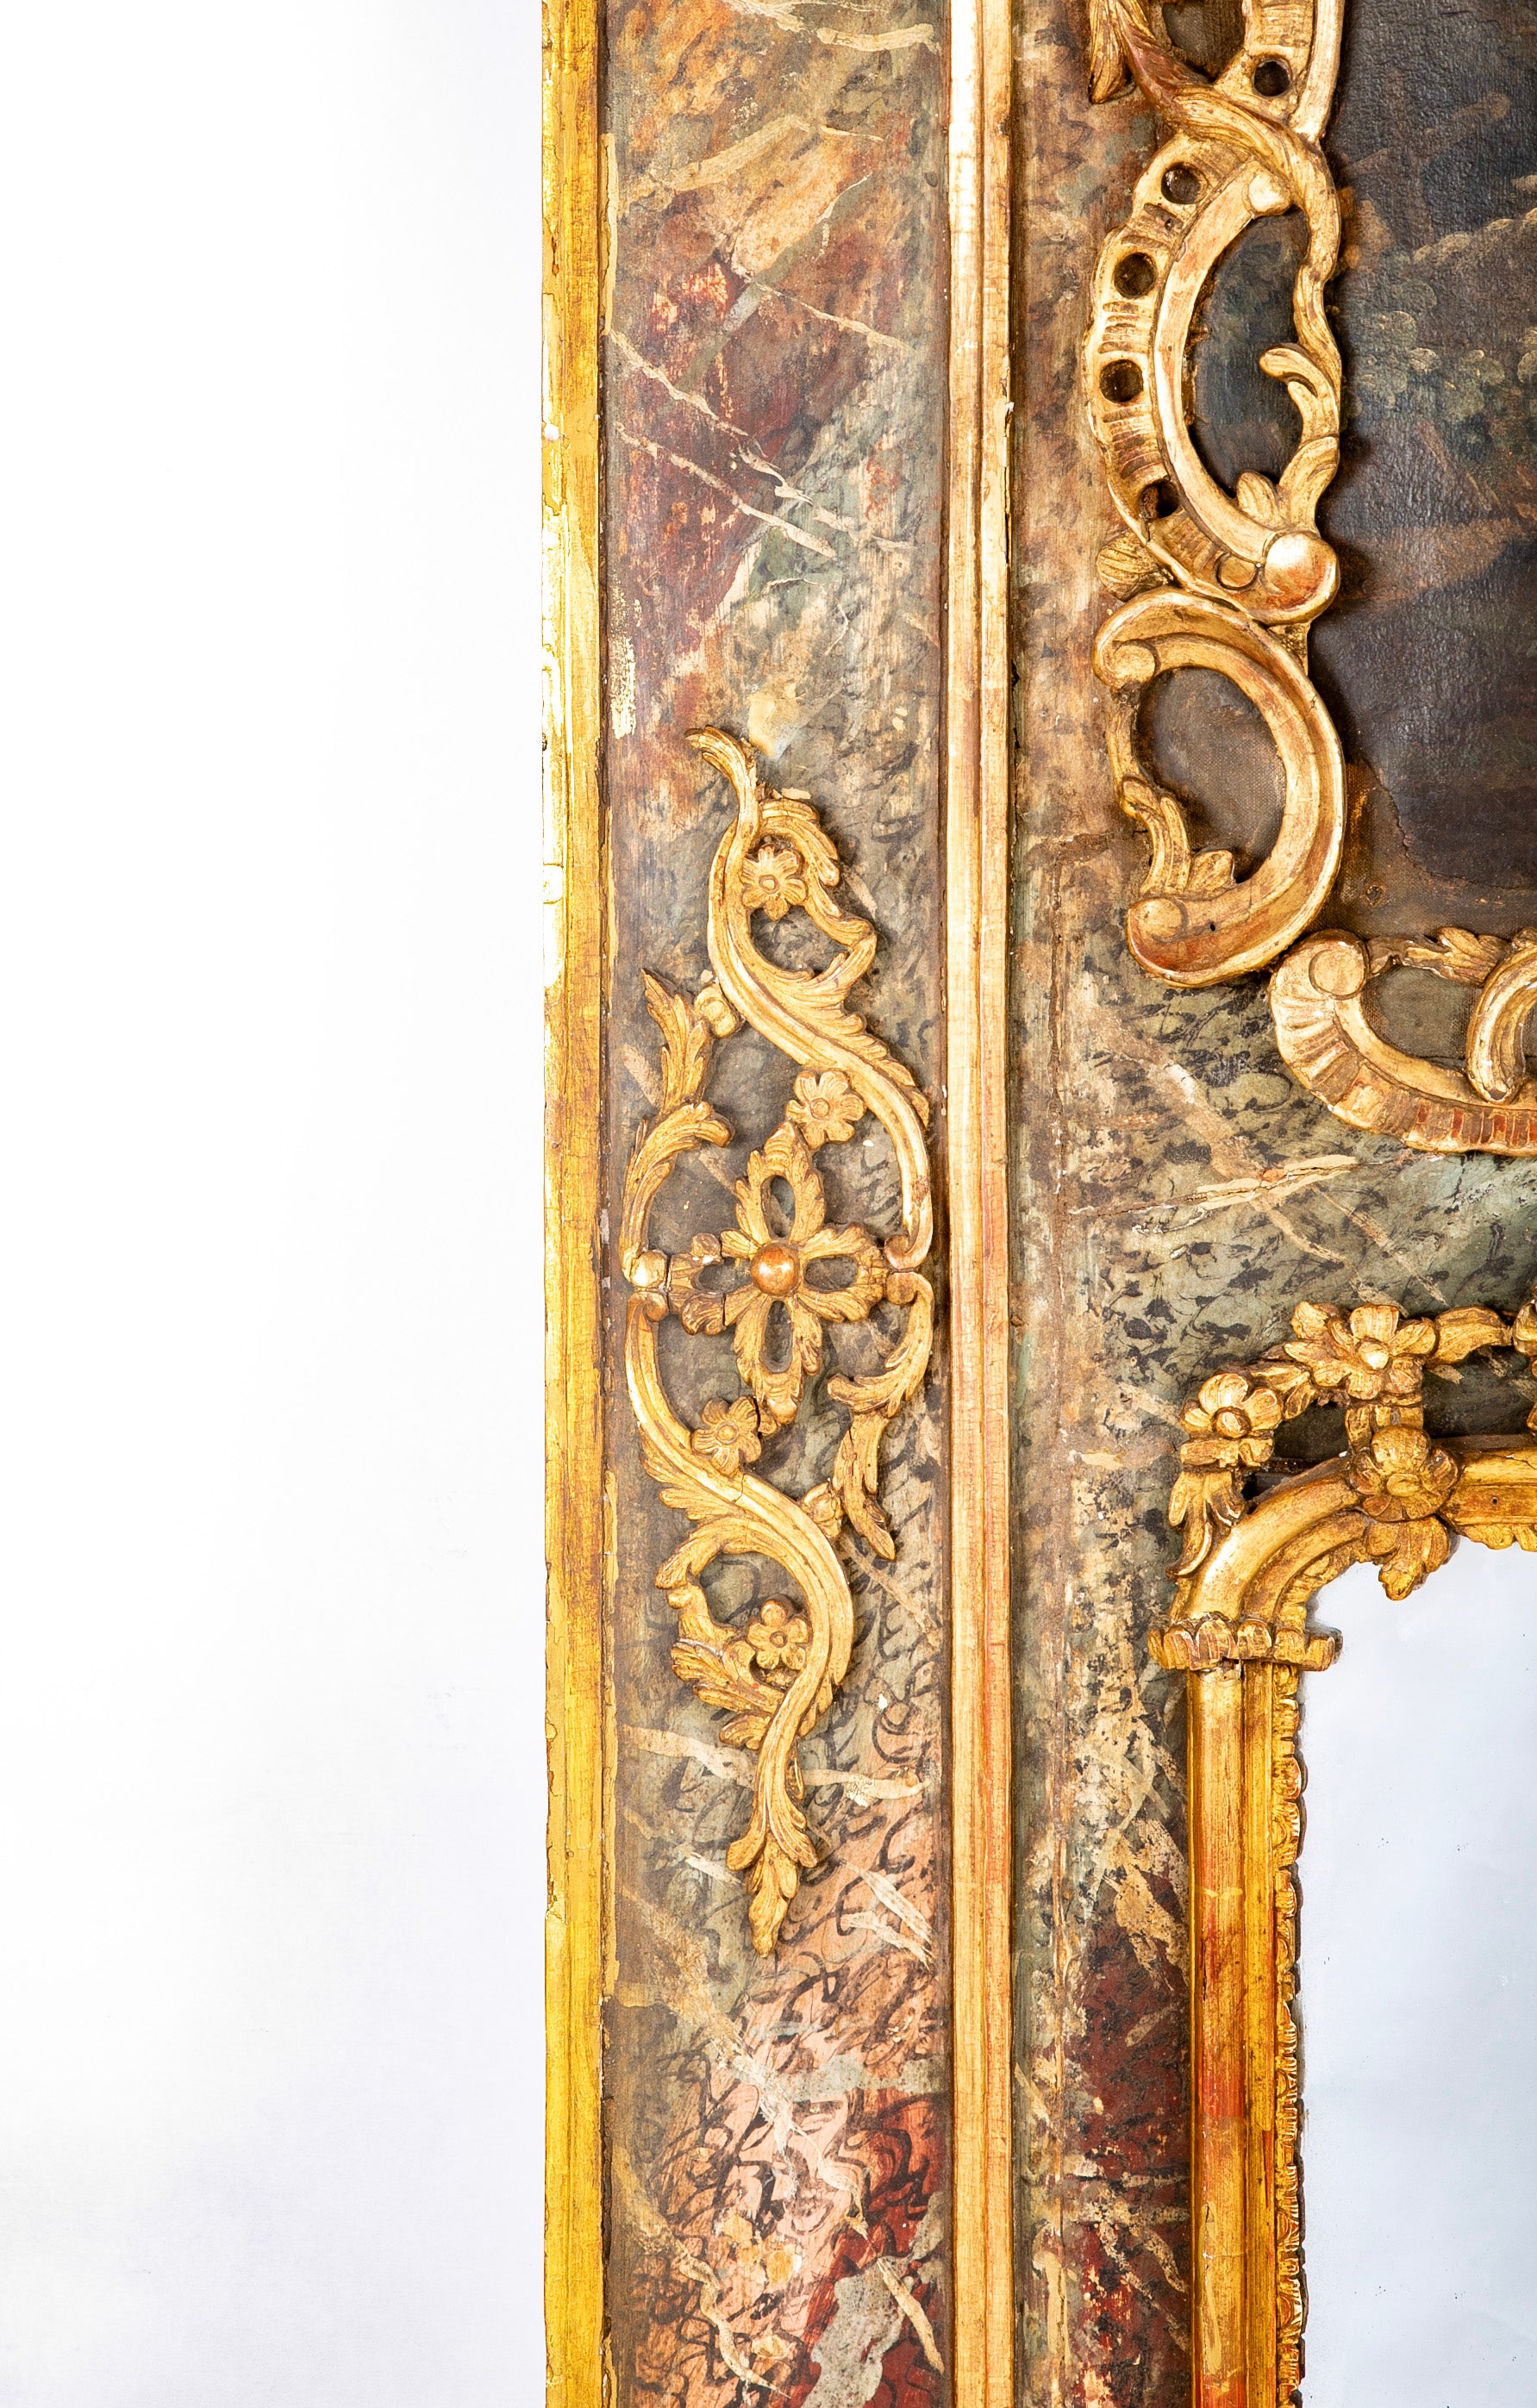 Late 18th Century French Trumeau Mirror with Romantic Painting